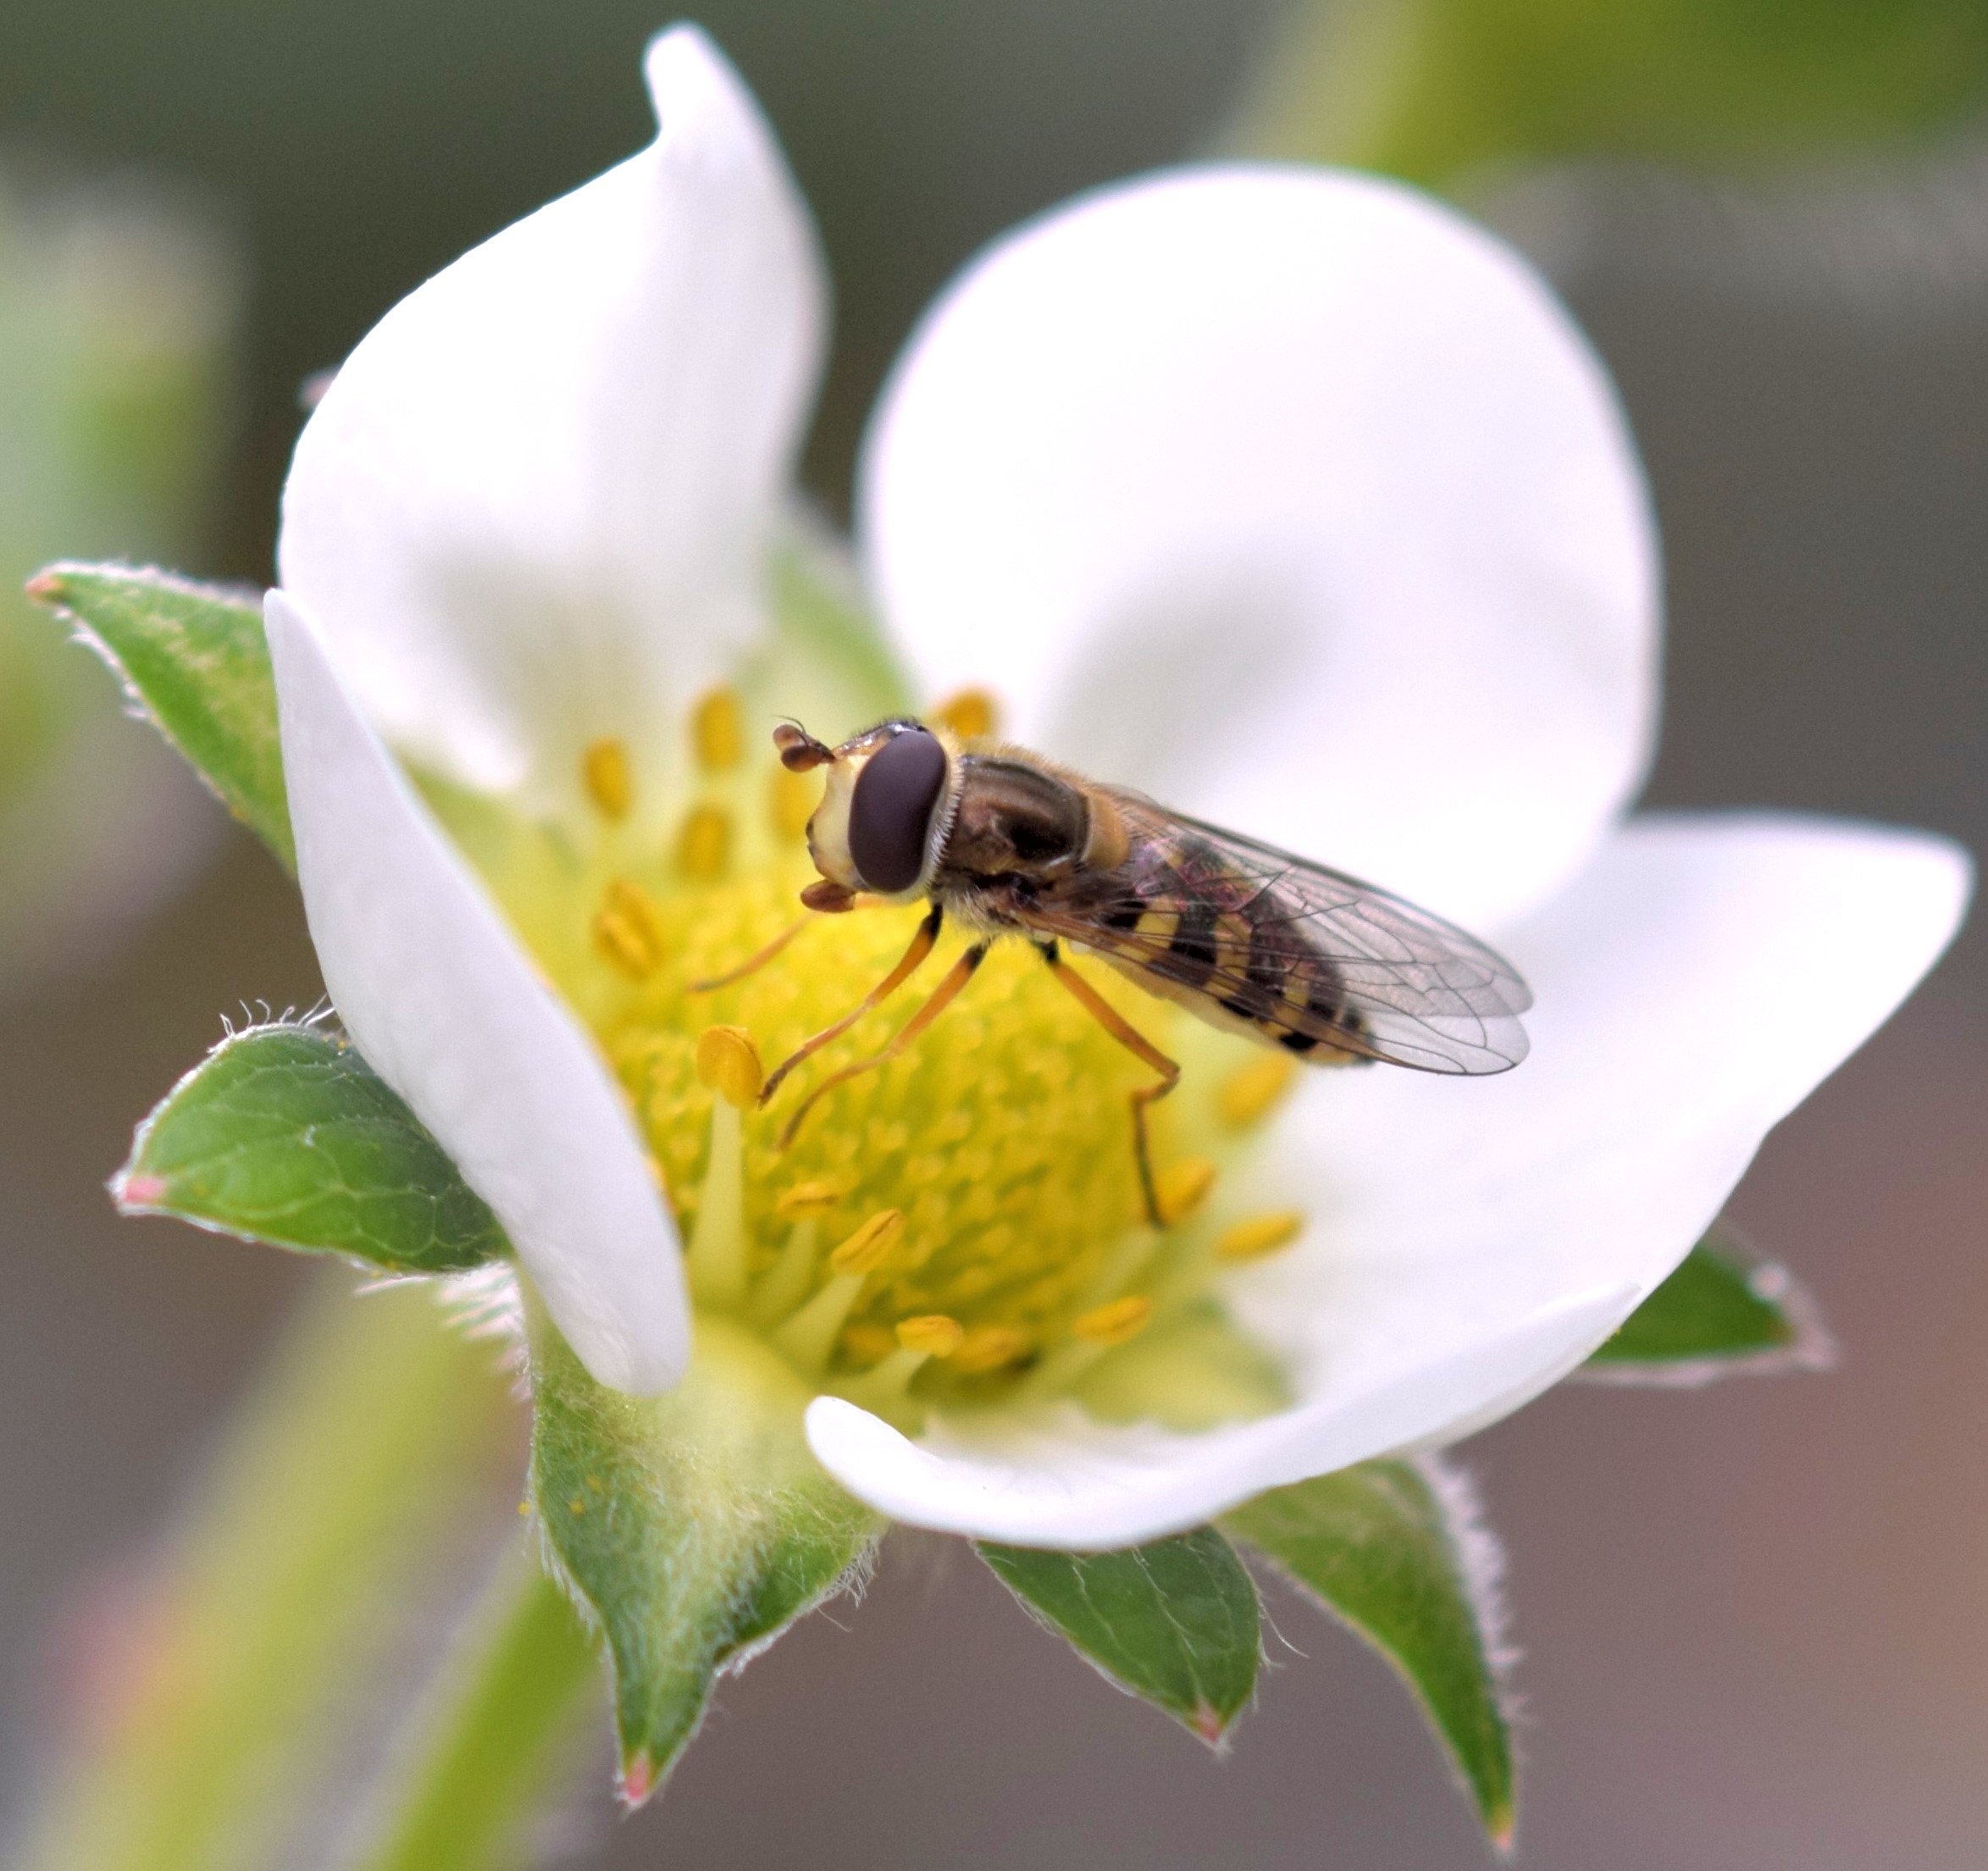 An aphid-eating hoverfly visiting a strawberry flower